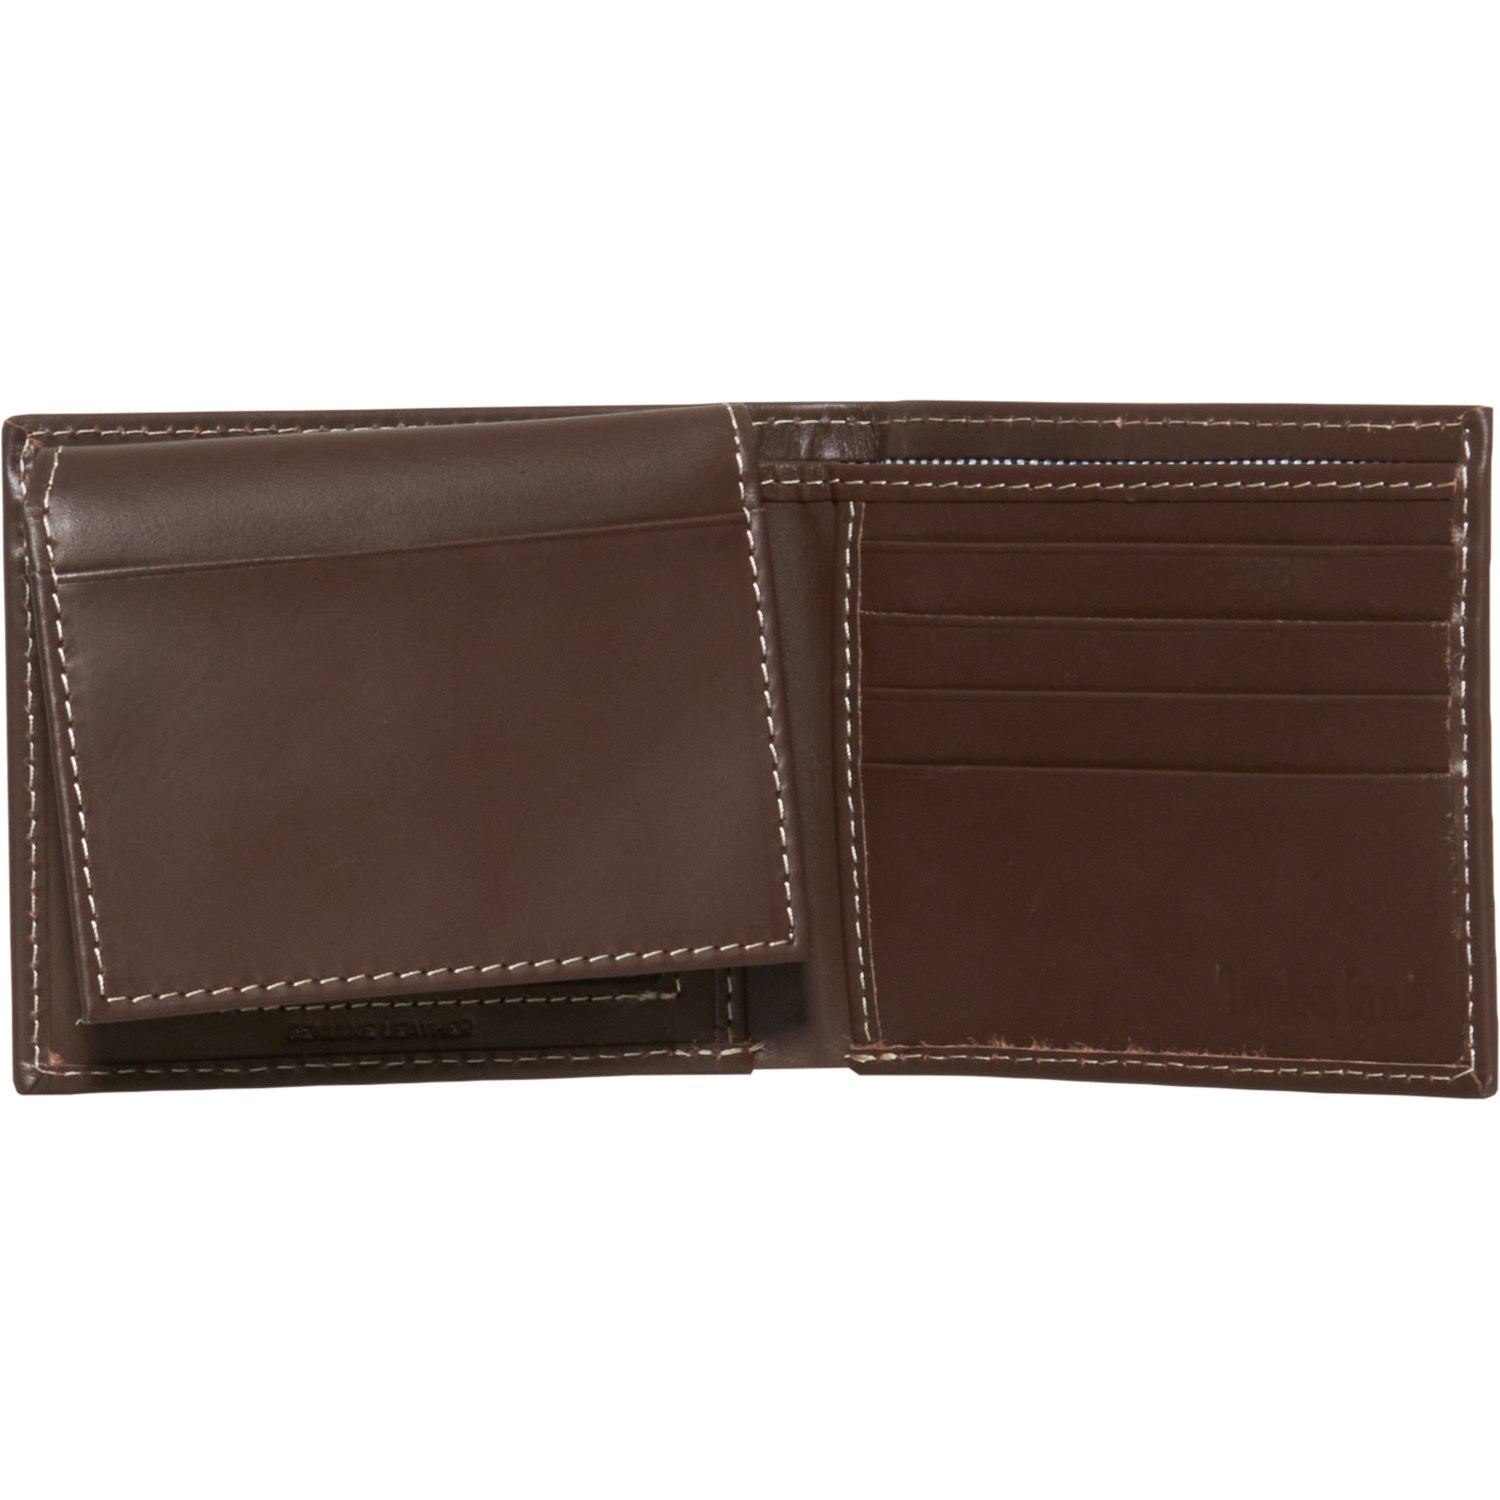 Timberland Blix Leather Passcase Wallet